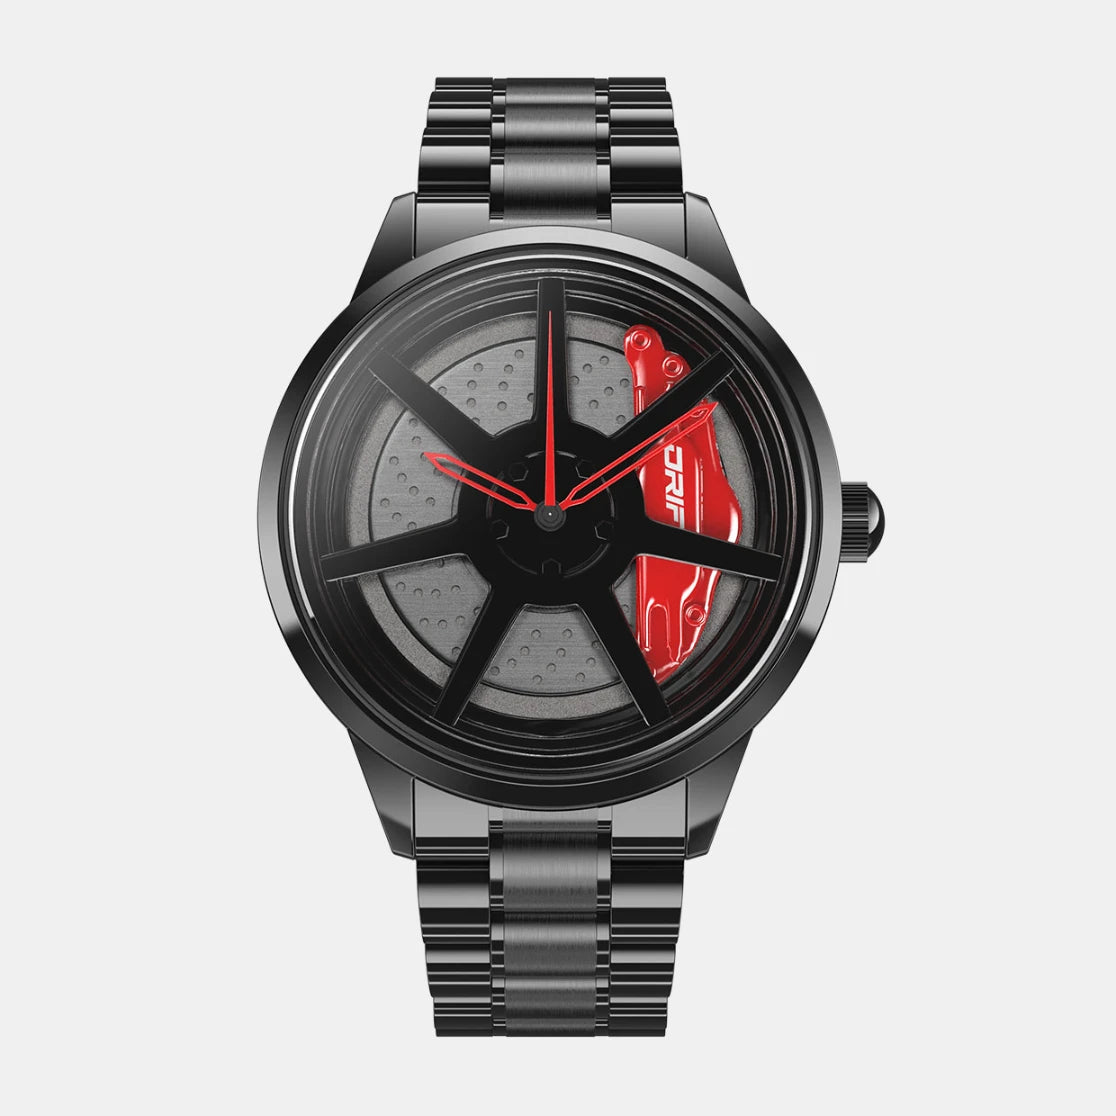 Illuminate your style with our red Drift Rim Watch! Crafted by a German startup, these precision watches feature innovative design, perfect for captivating motorsport, tuning, and auto enthusiasts.  #id_46744374608202